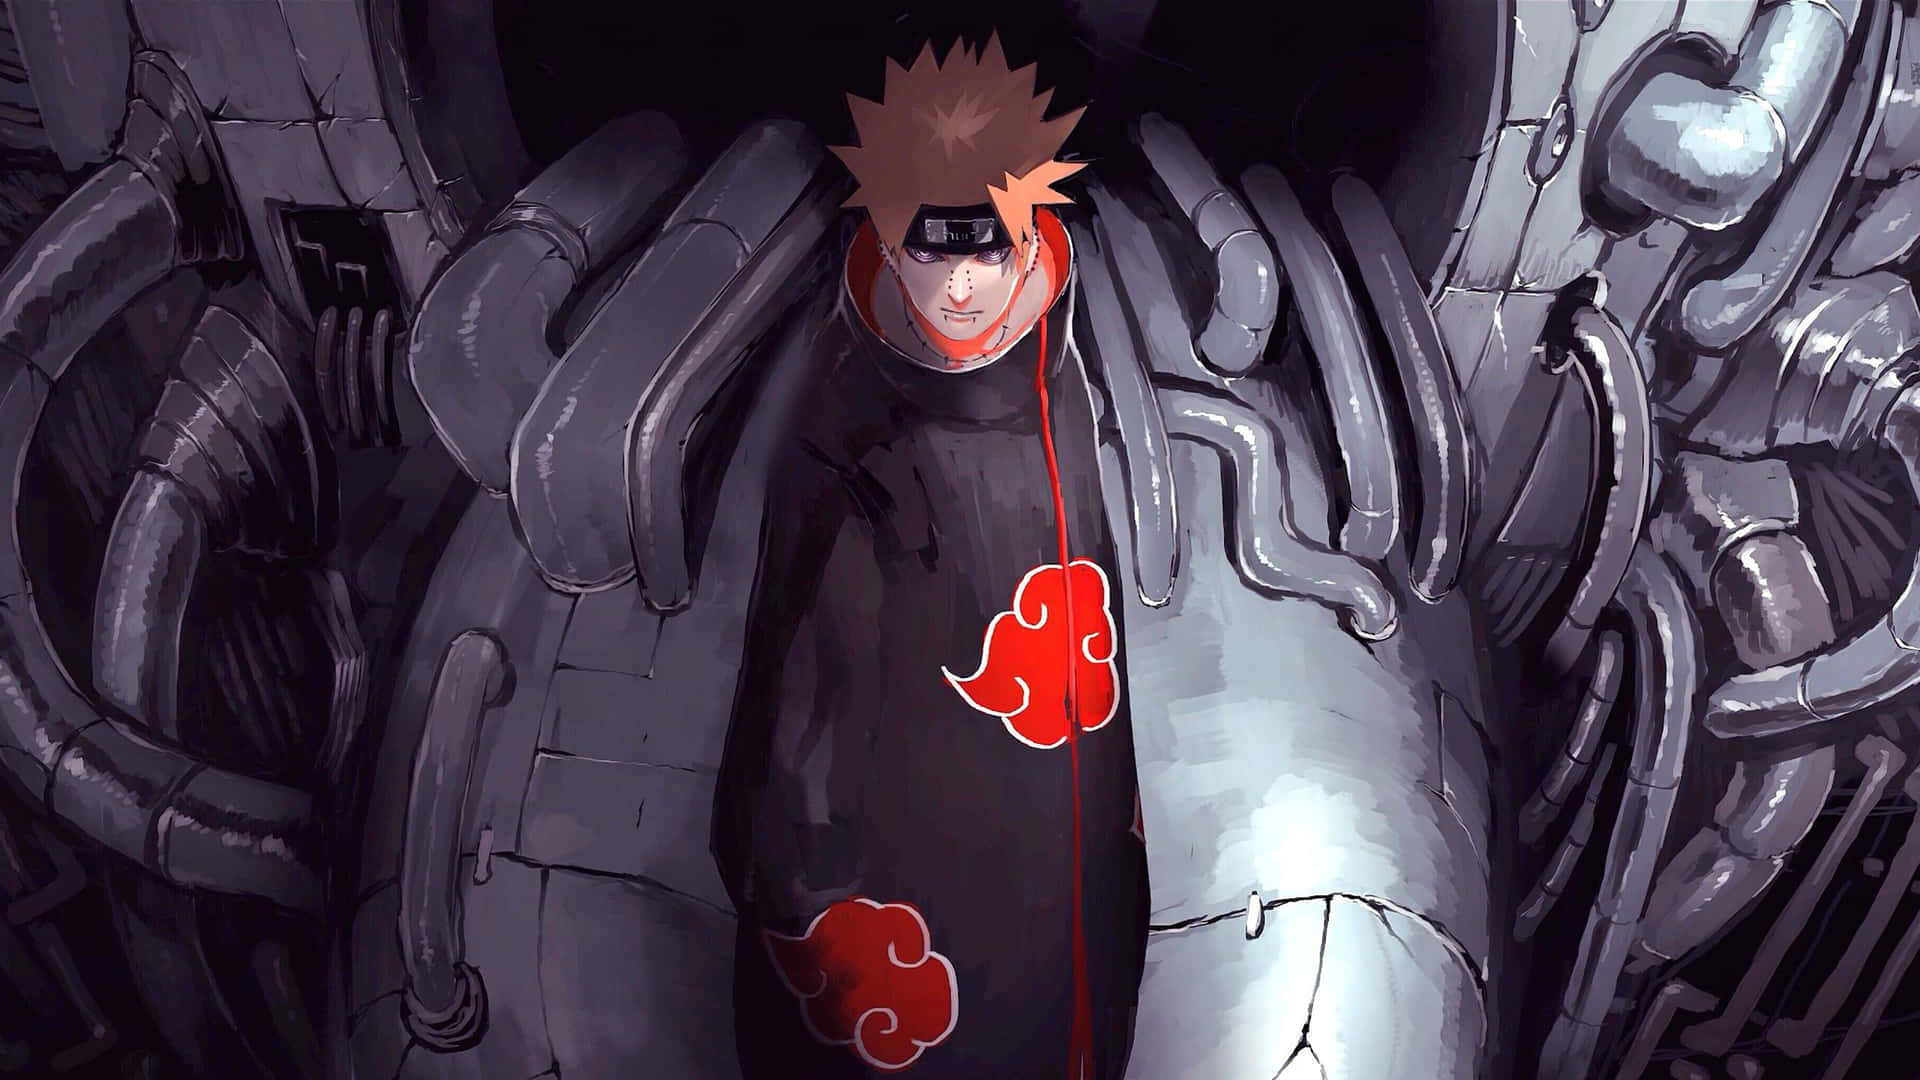 Pain unleashes the Rinnegan against Naruto. Wallpaper